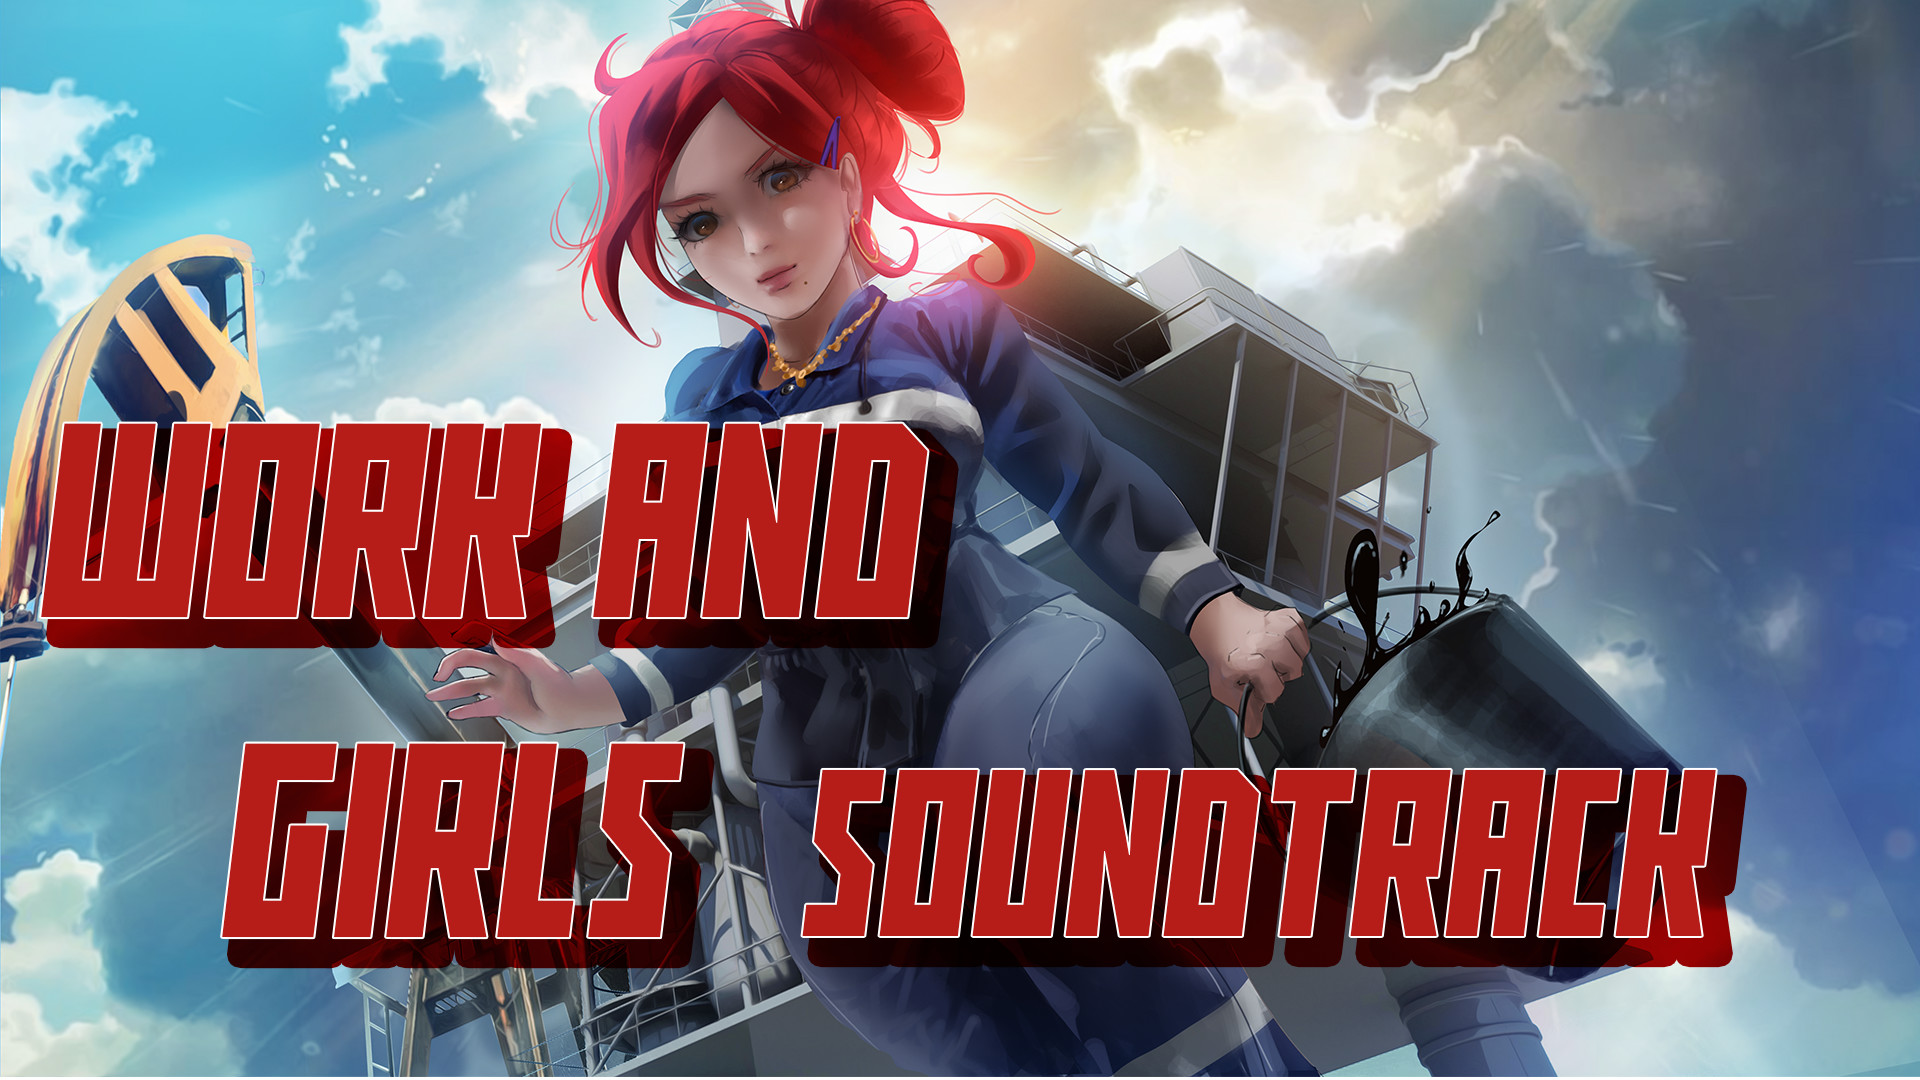 Work And Girls Soundtrack Featured Screenshot #1